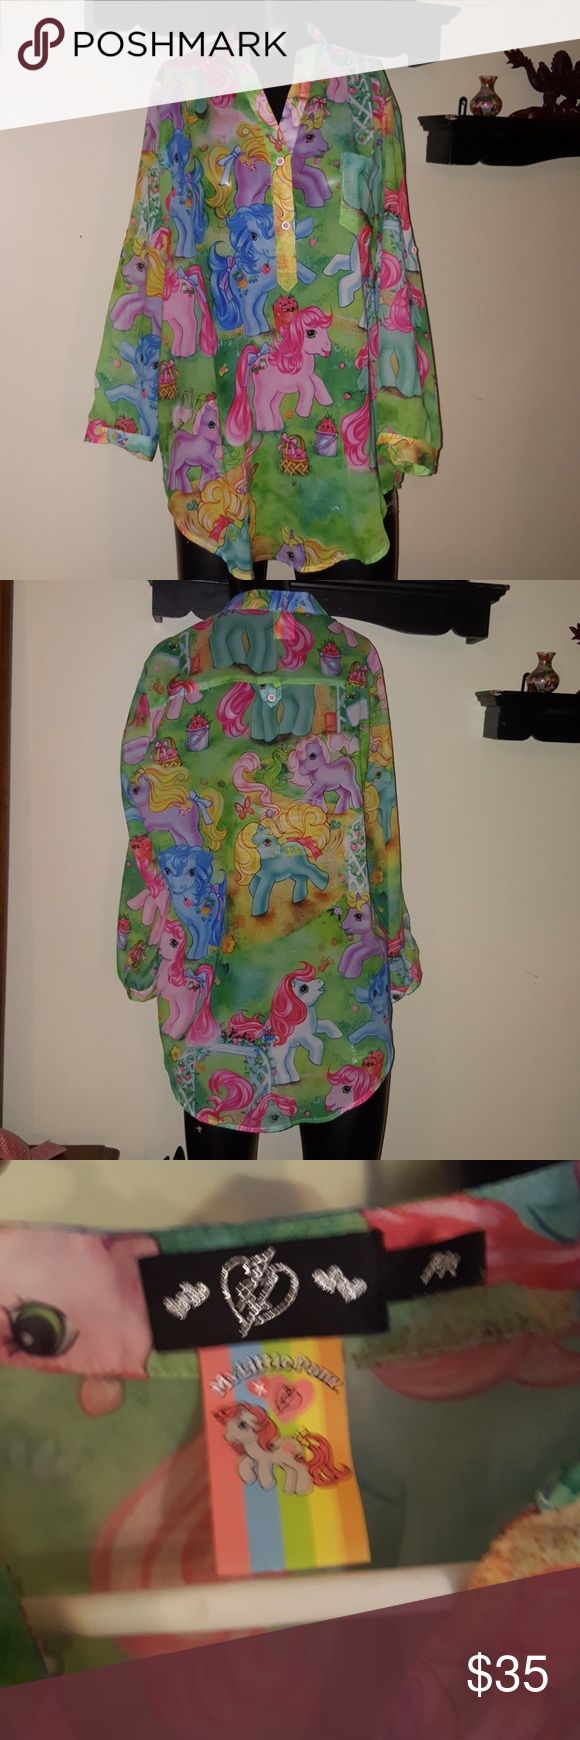 Ironfist My Little Pony Tunic in new.condition. size medium. my little pony prin